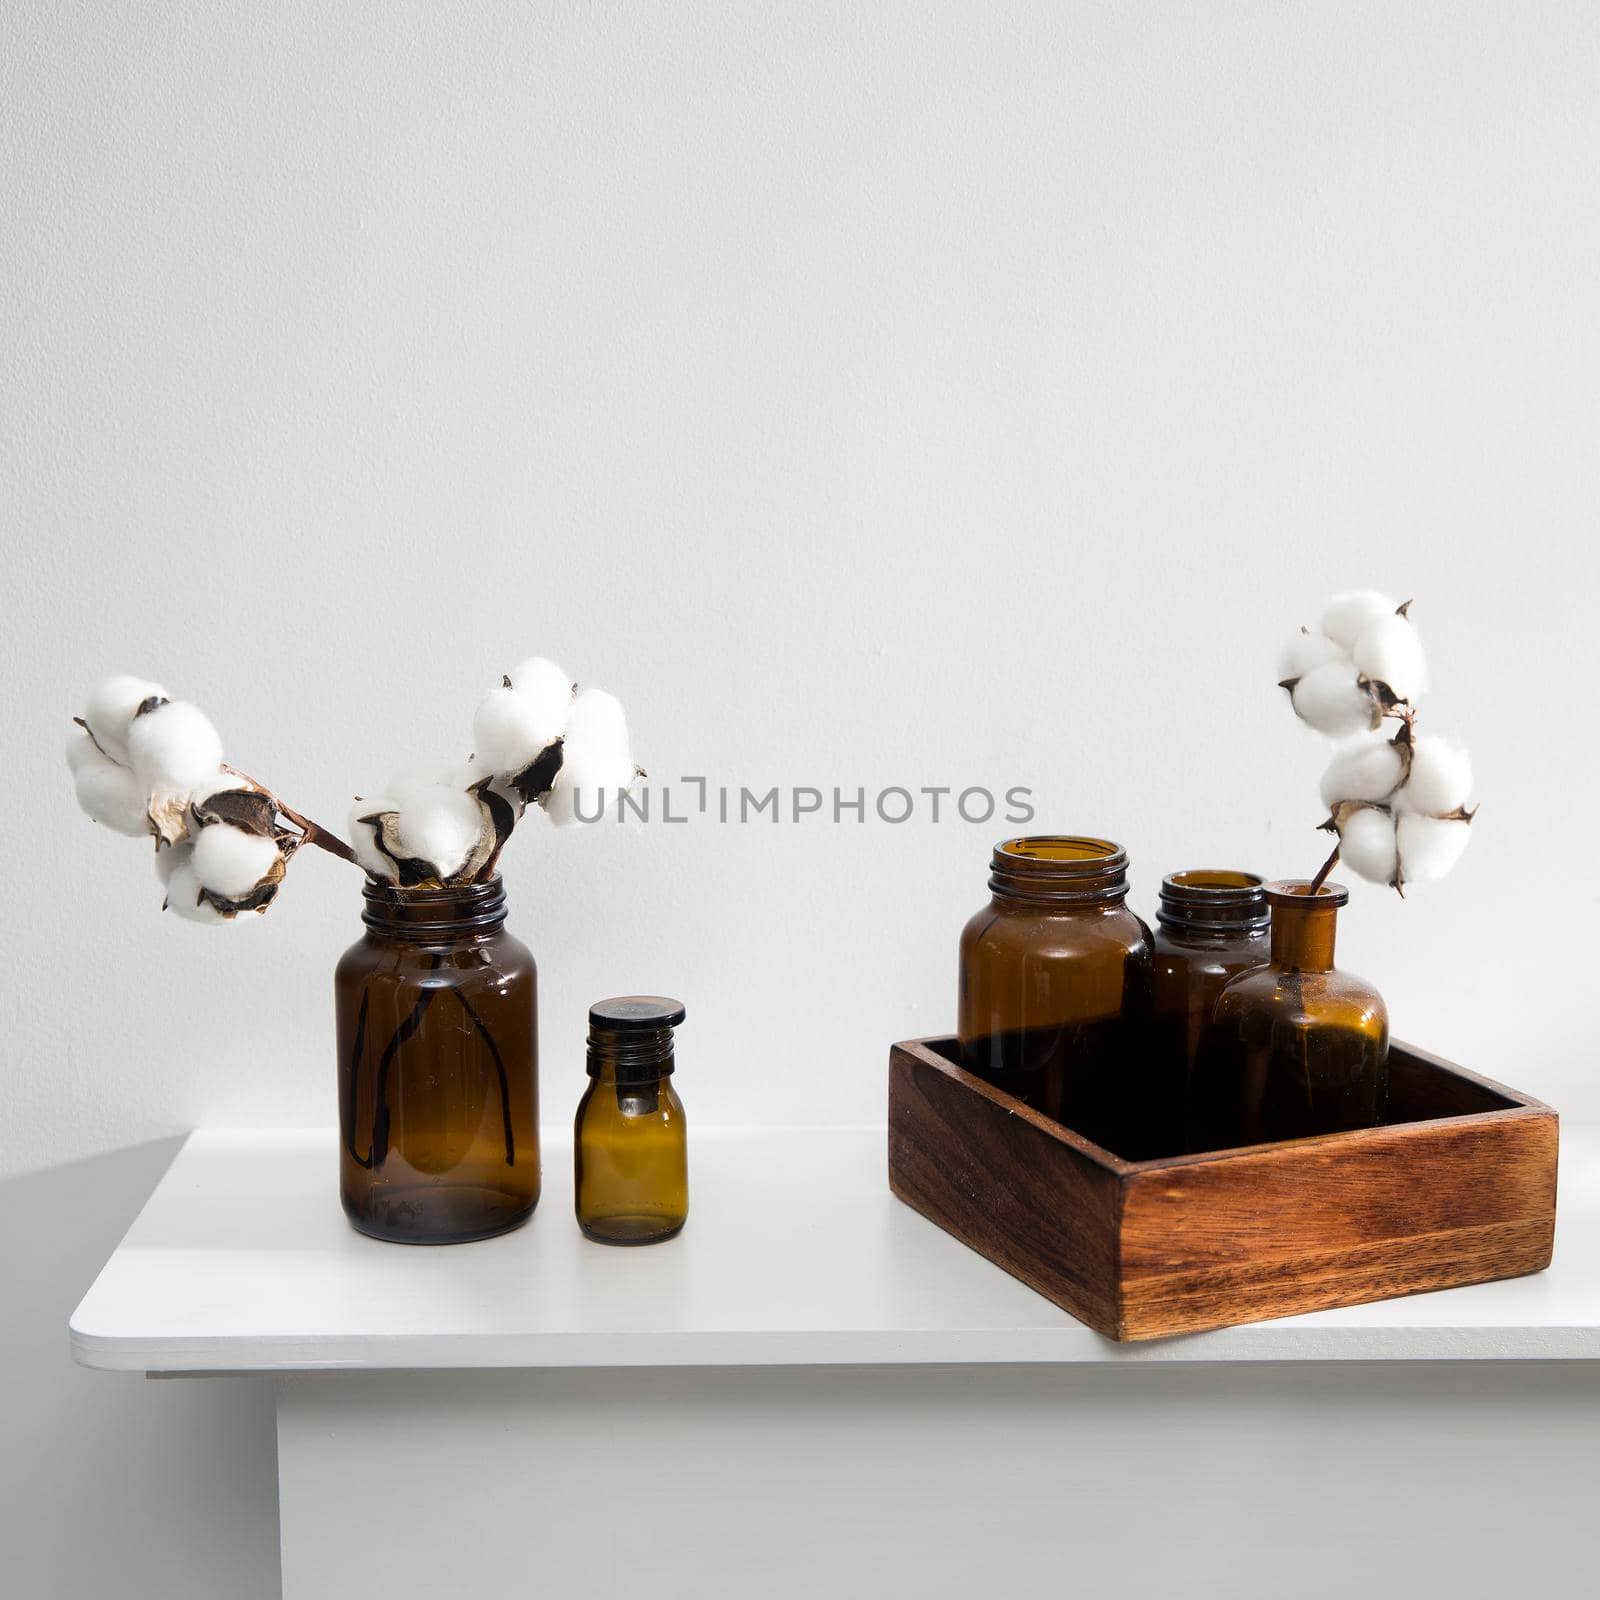 Cotton flowers in glass brown small pharmaceutical bottles on white table surface as room decoration. Copy space